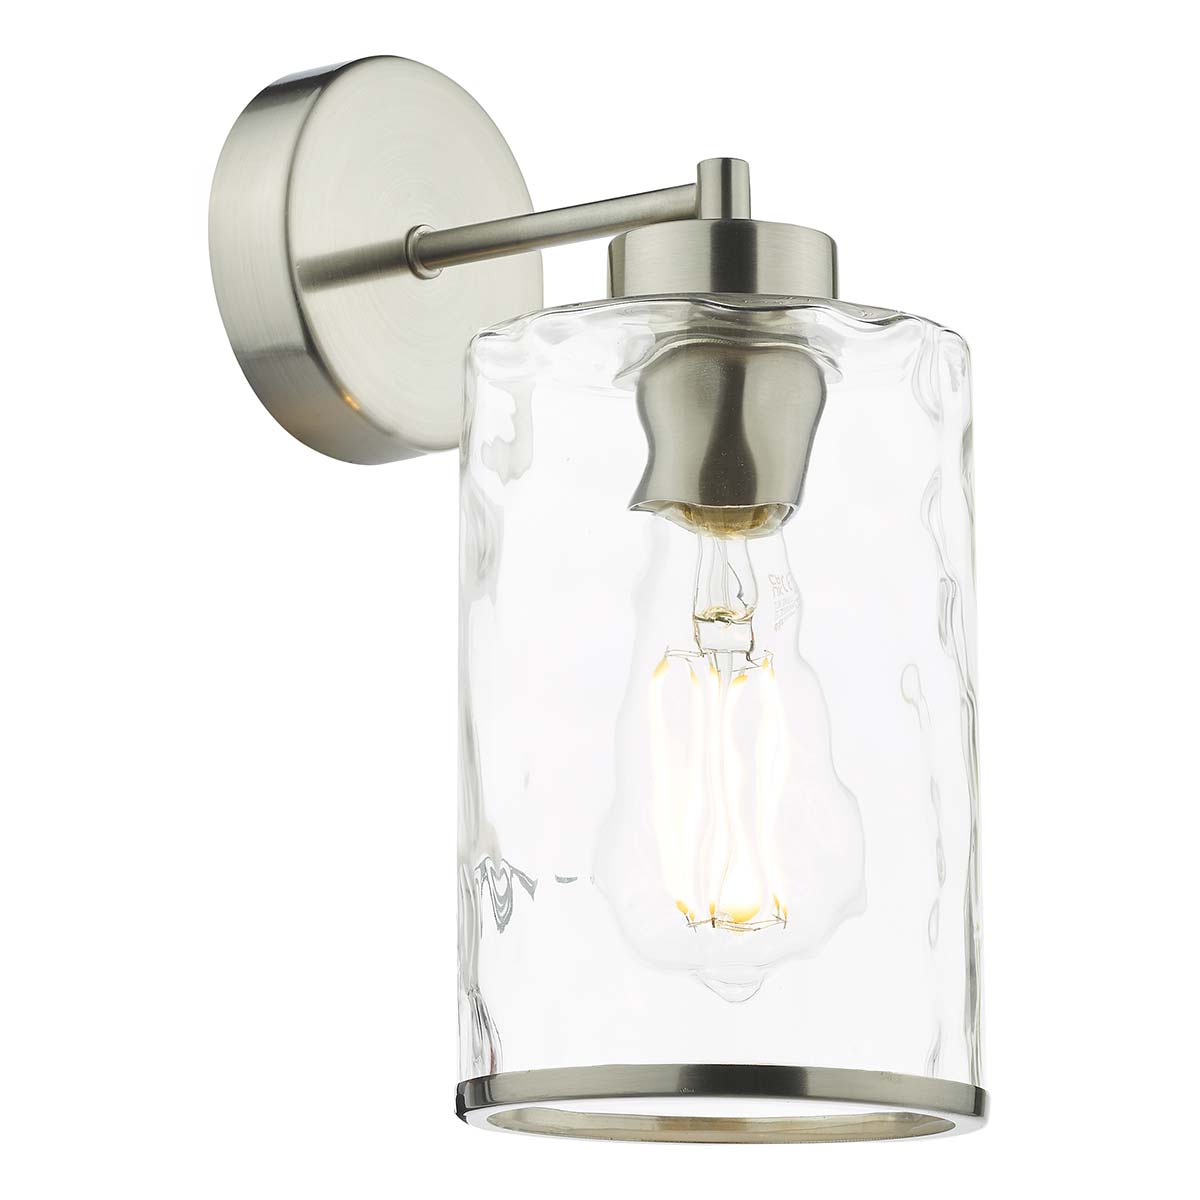 Dar Olsen Switched Wall Light Satin Chrome & Dimpled Glass